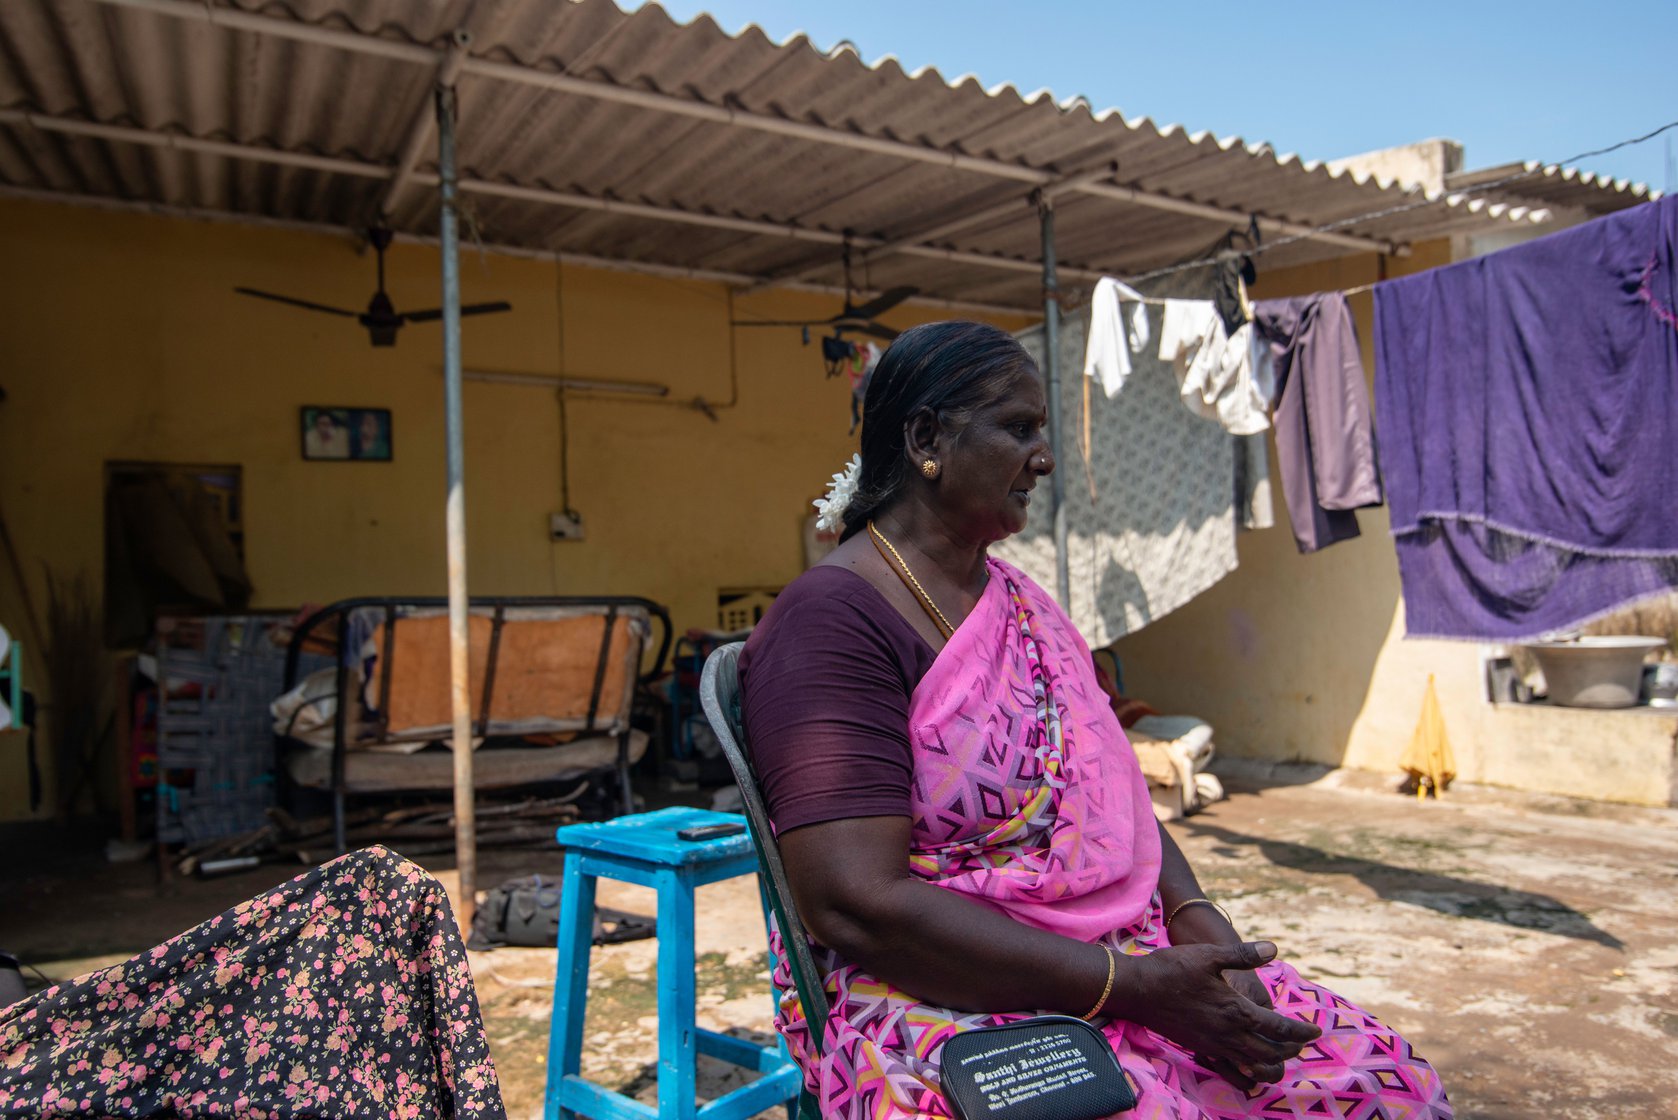 Shanthi akka sitting outside her home in Kondangi. With her earnings from doing health work in the community, she was able to build a small one-room house. She was the only person in her family with a steady income until recently